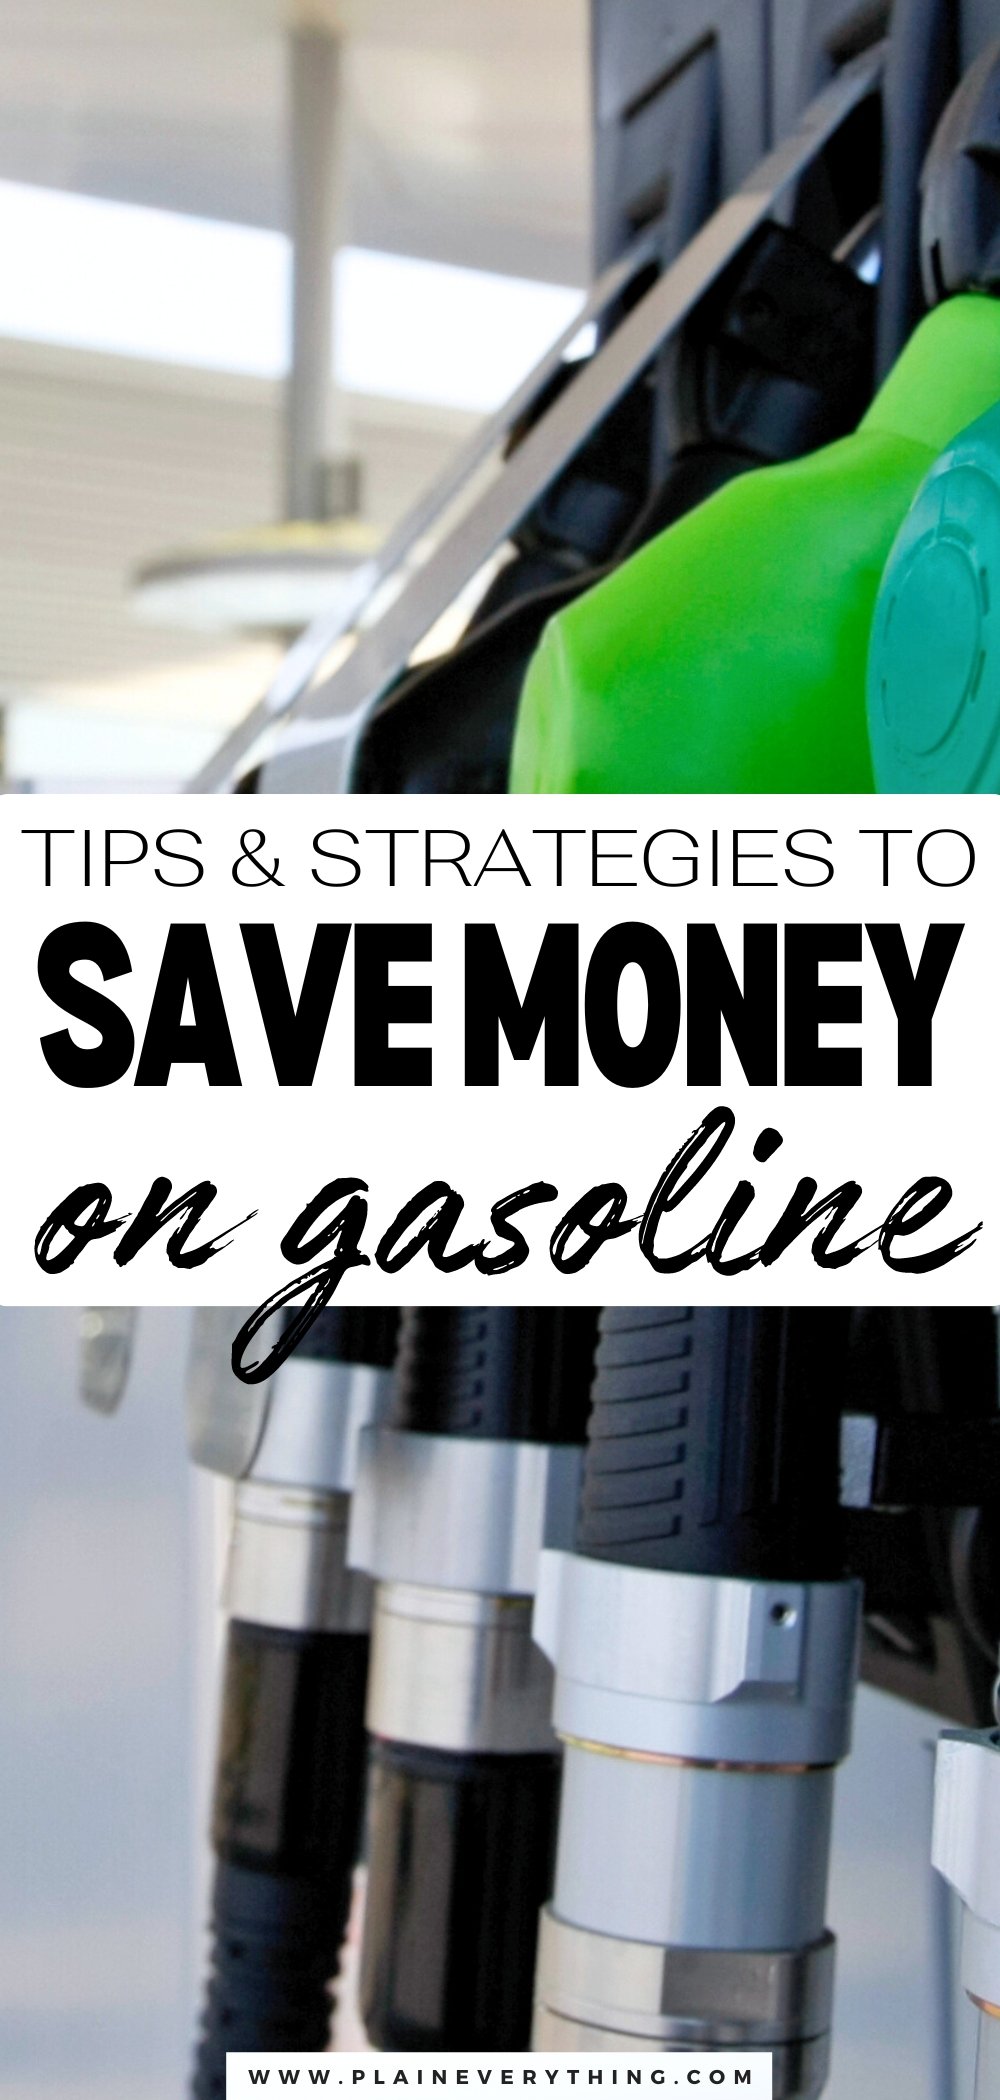 How To Save Money on Gas